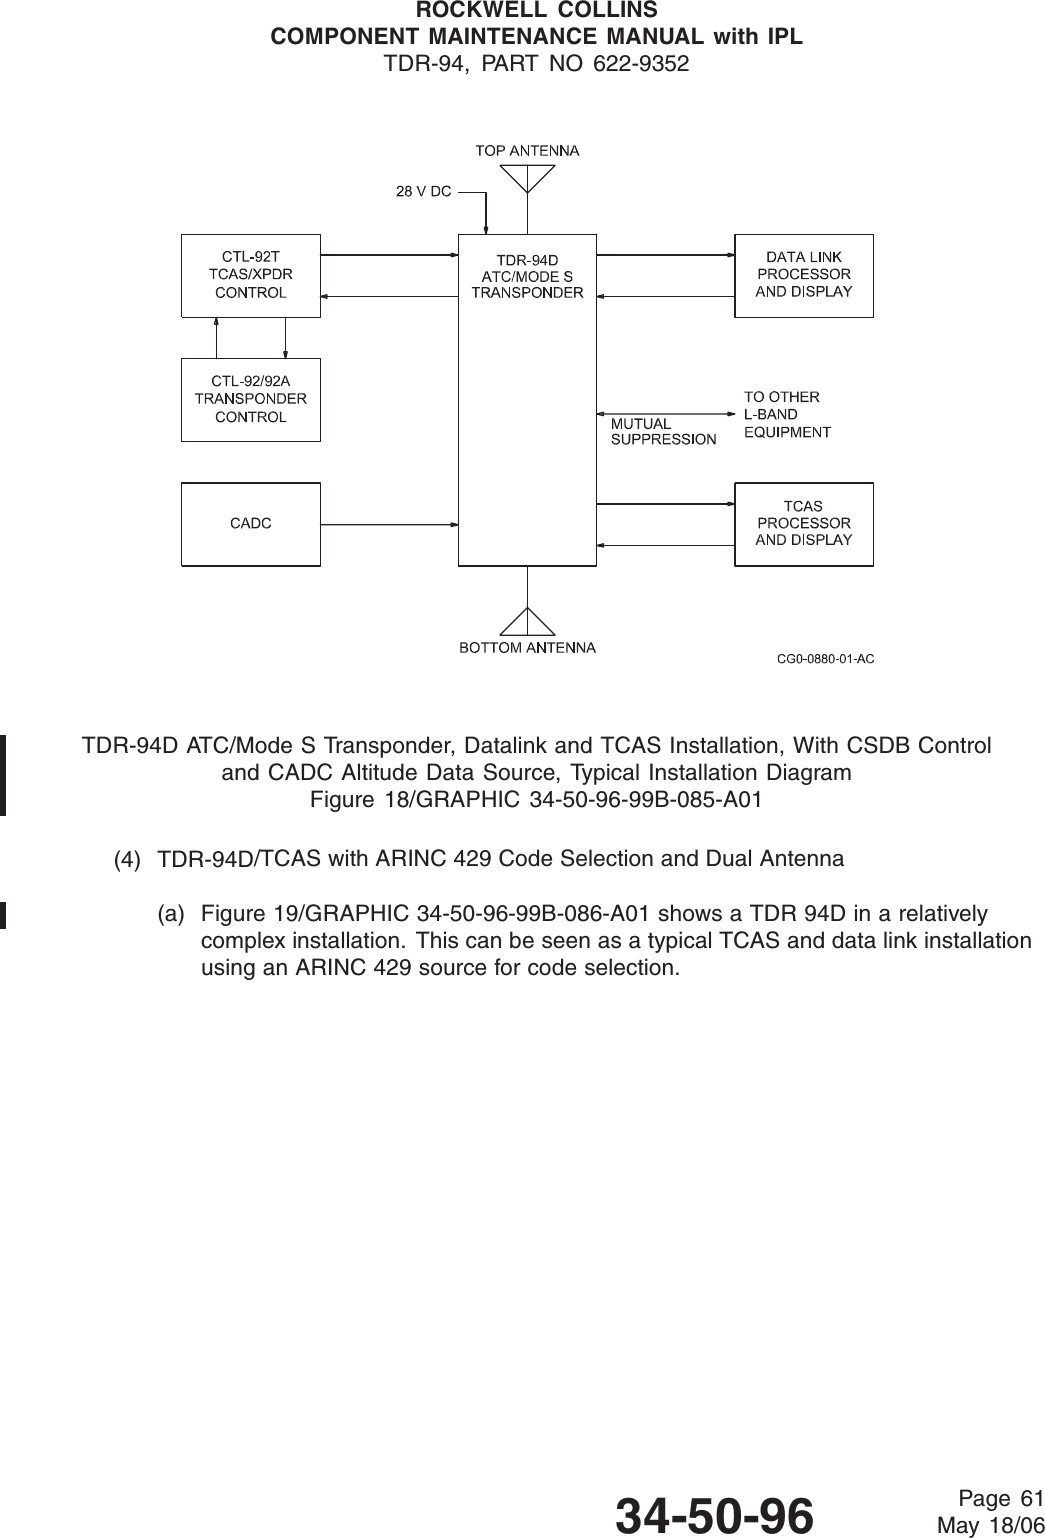 ROCKWELL COLLINSCOMPONENT MAINTENANCE MANUAL with IPLTDR-94, PART NO 622-9352TDR-94D ATC/Mode S Transponder, Datalink and TCAS Installation, With CSDB Controland CADC Altitude Data Source, Typical Installation DiagramFigure 18/GRAPHIC 34-50-96-99B-085-A01(4) TDR-94D/TCAS with ARINC 429 Code Selection and Dual Antenna(a) Figure 19/GRAPHIC 34-50-96-99B-086-A01 shows a TDR 94D in a relativelycomplex installation. This can be seen as a typical TCAS and data link installationusing an ARINC 429 source for code selection.34-50-96 Page 61May 18/06